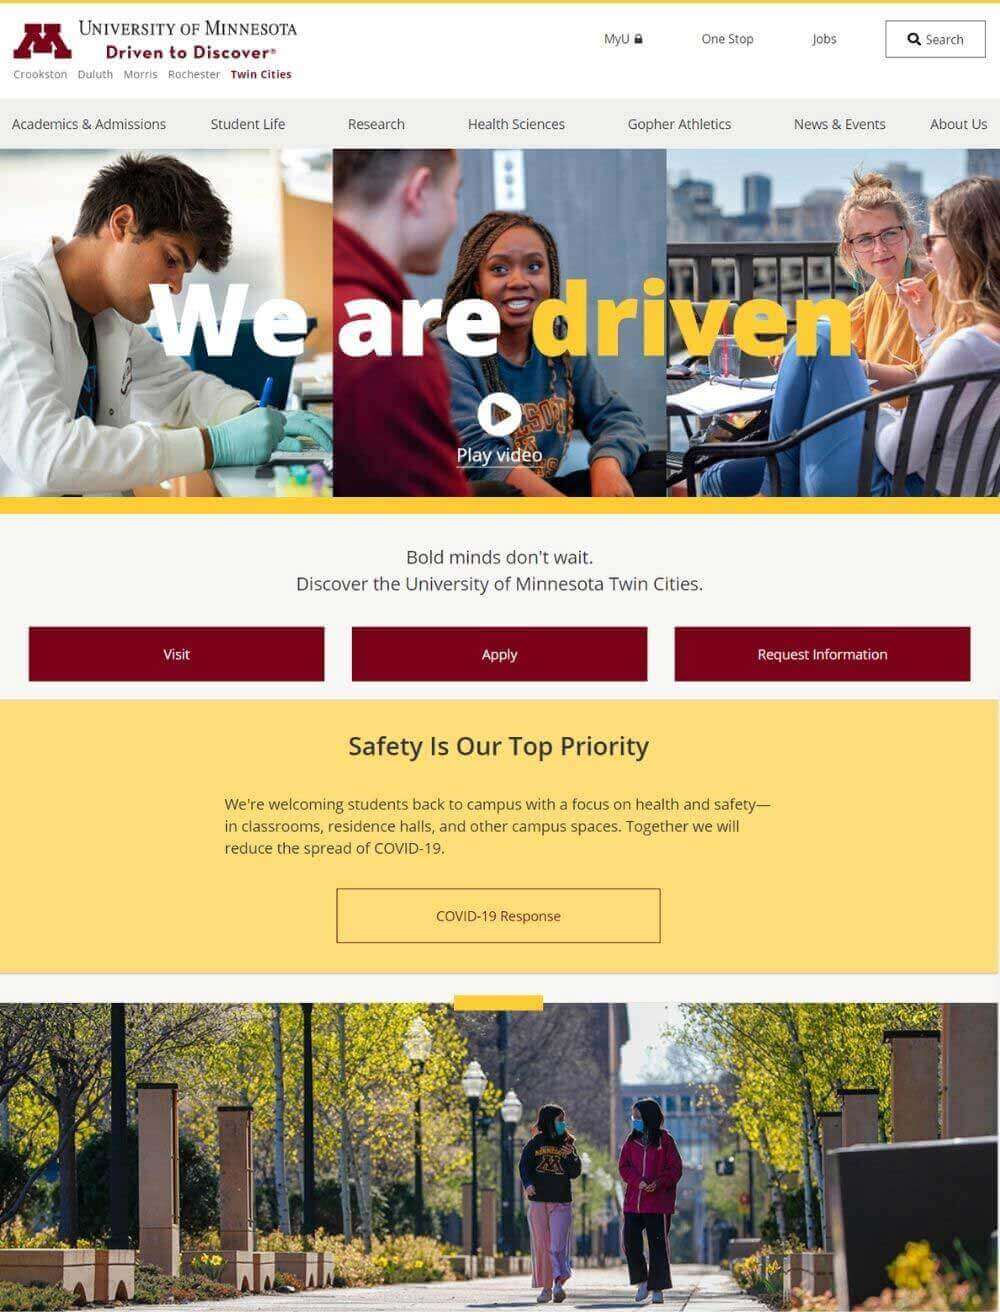 Continuing Education Software Systems - Read the University of Minnesota case study!